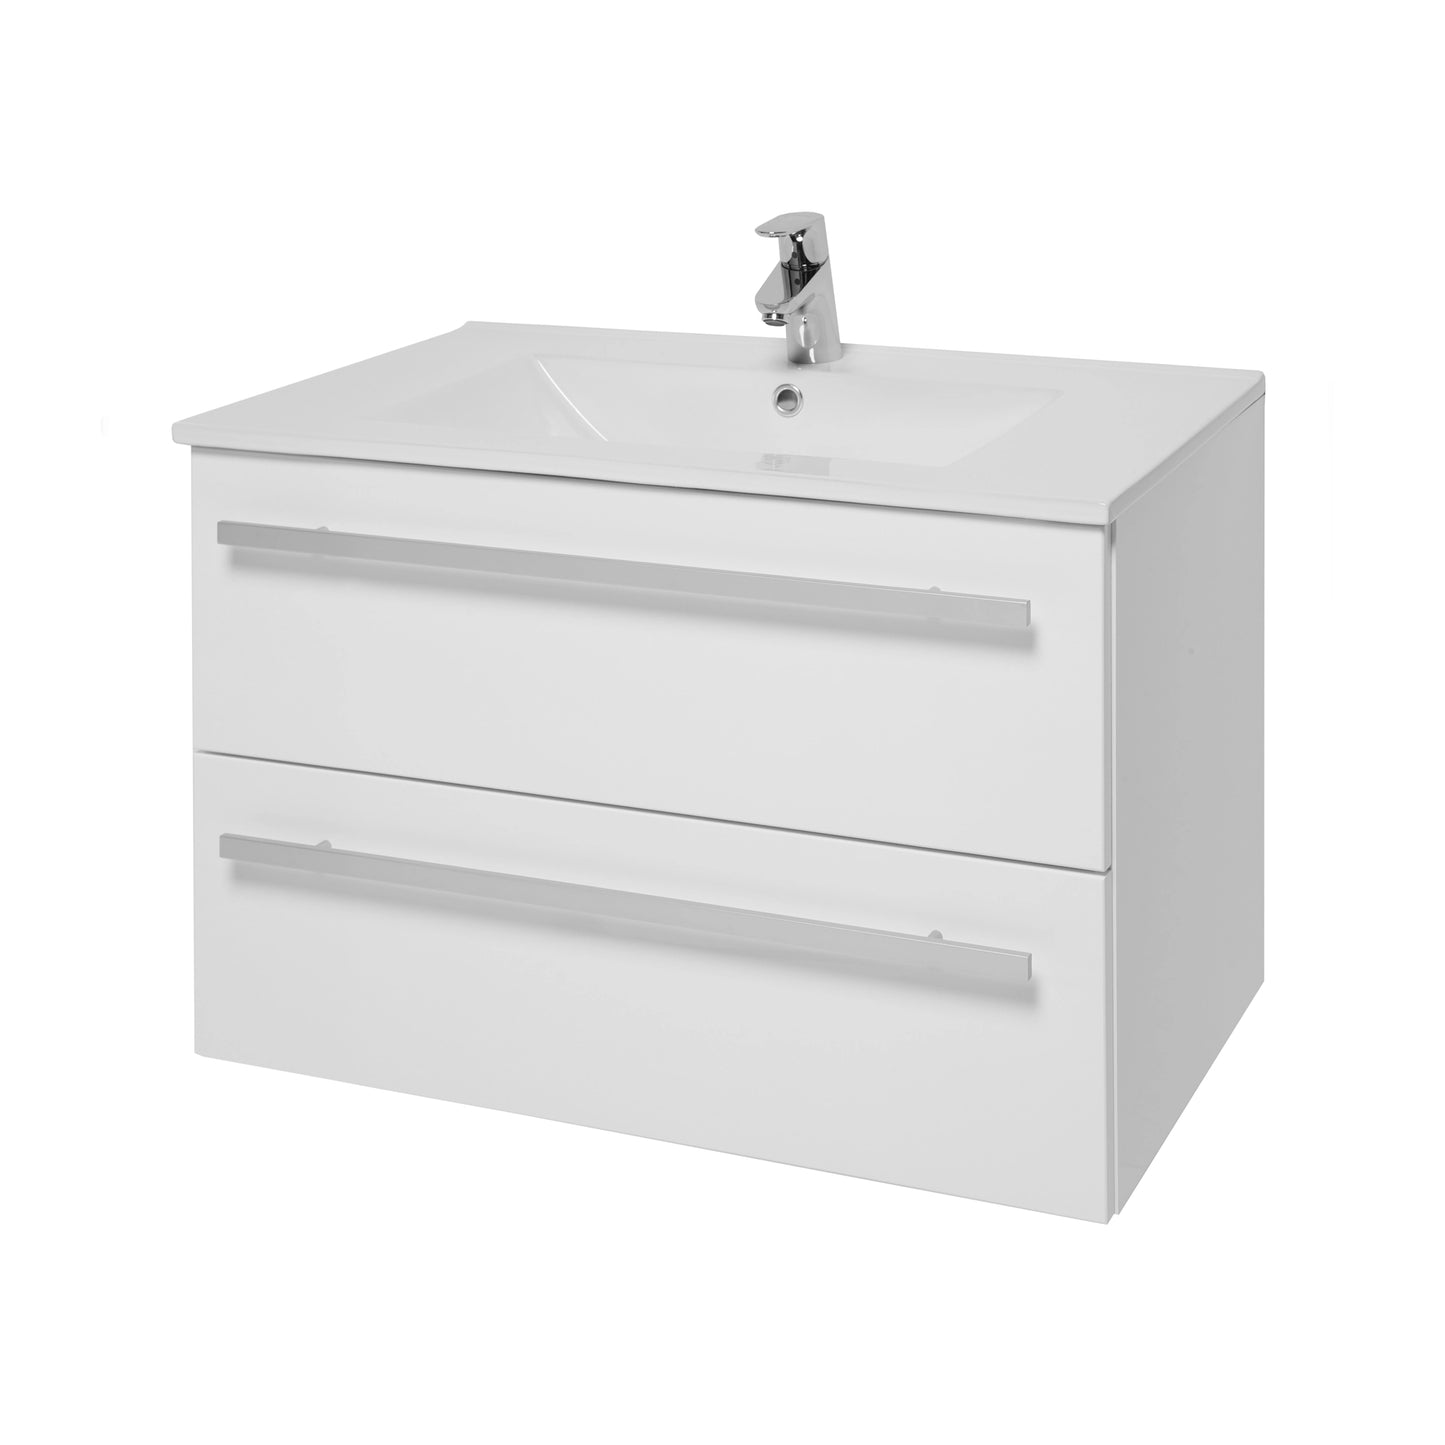 Purity Kartell Wall Mounted Two Drawer 800mm Basin Sink Vanity Unit